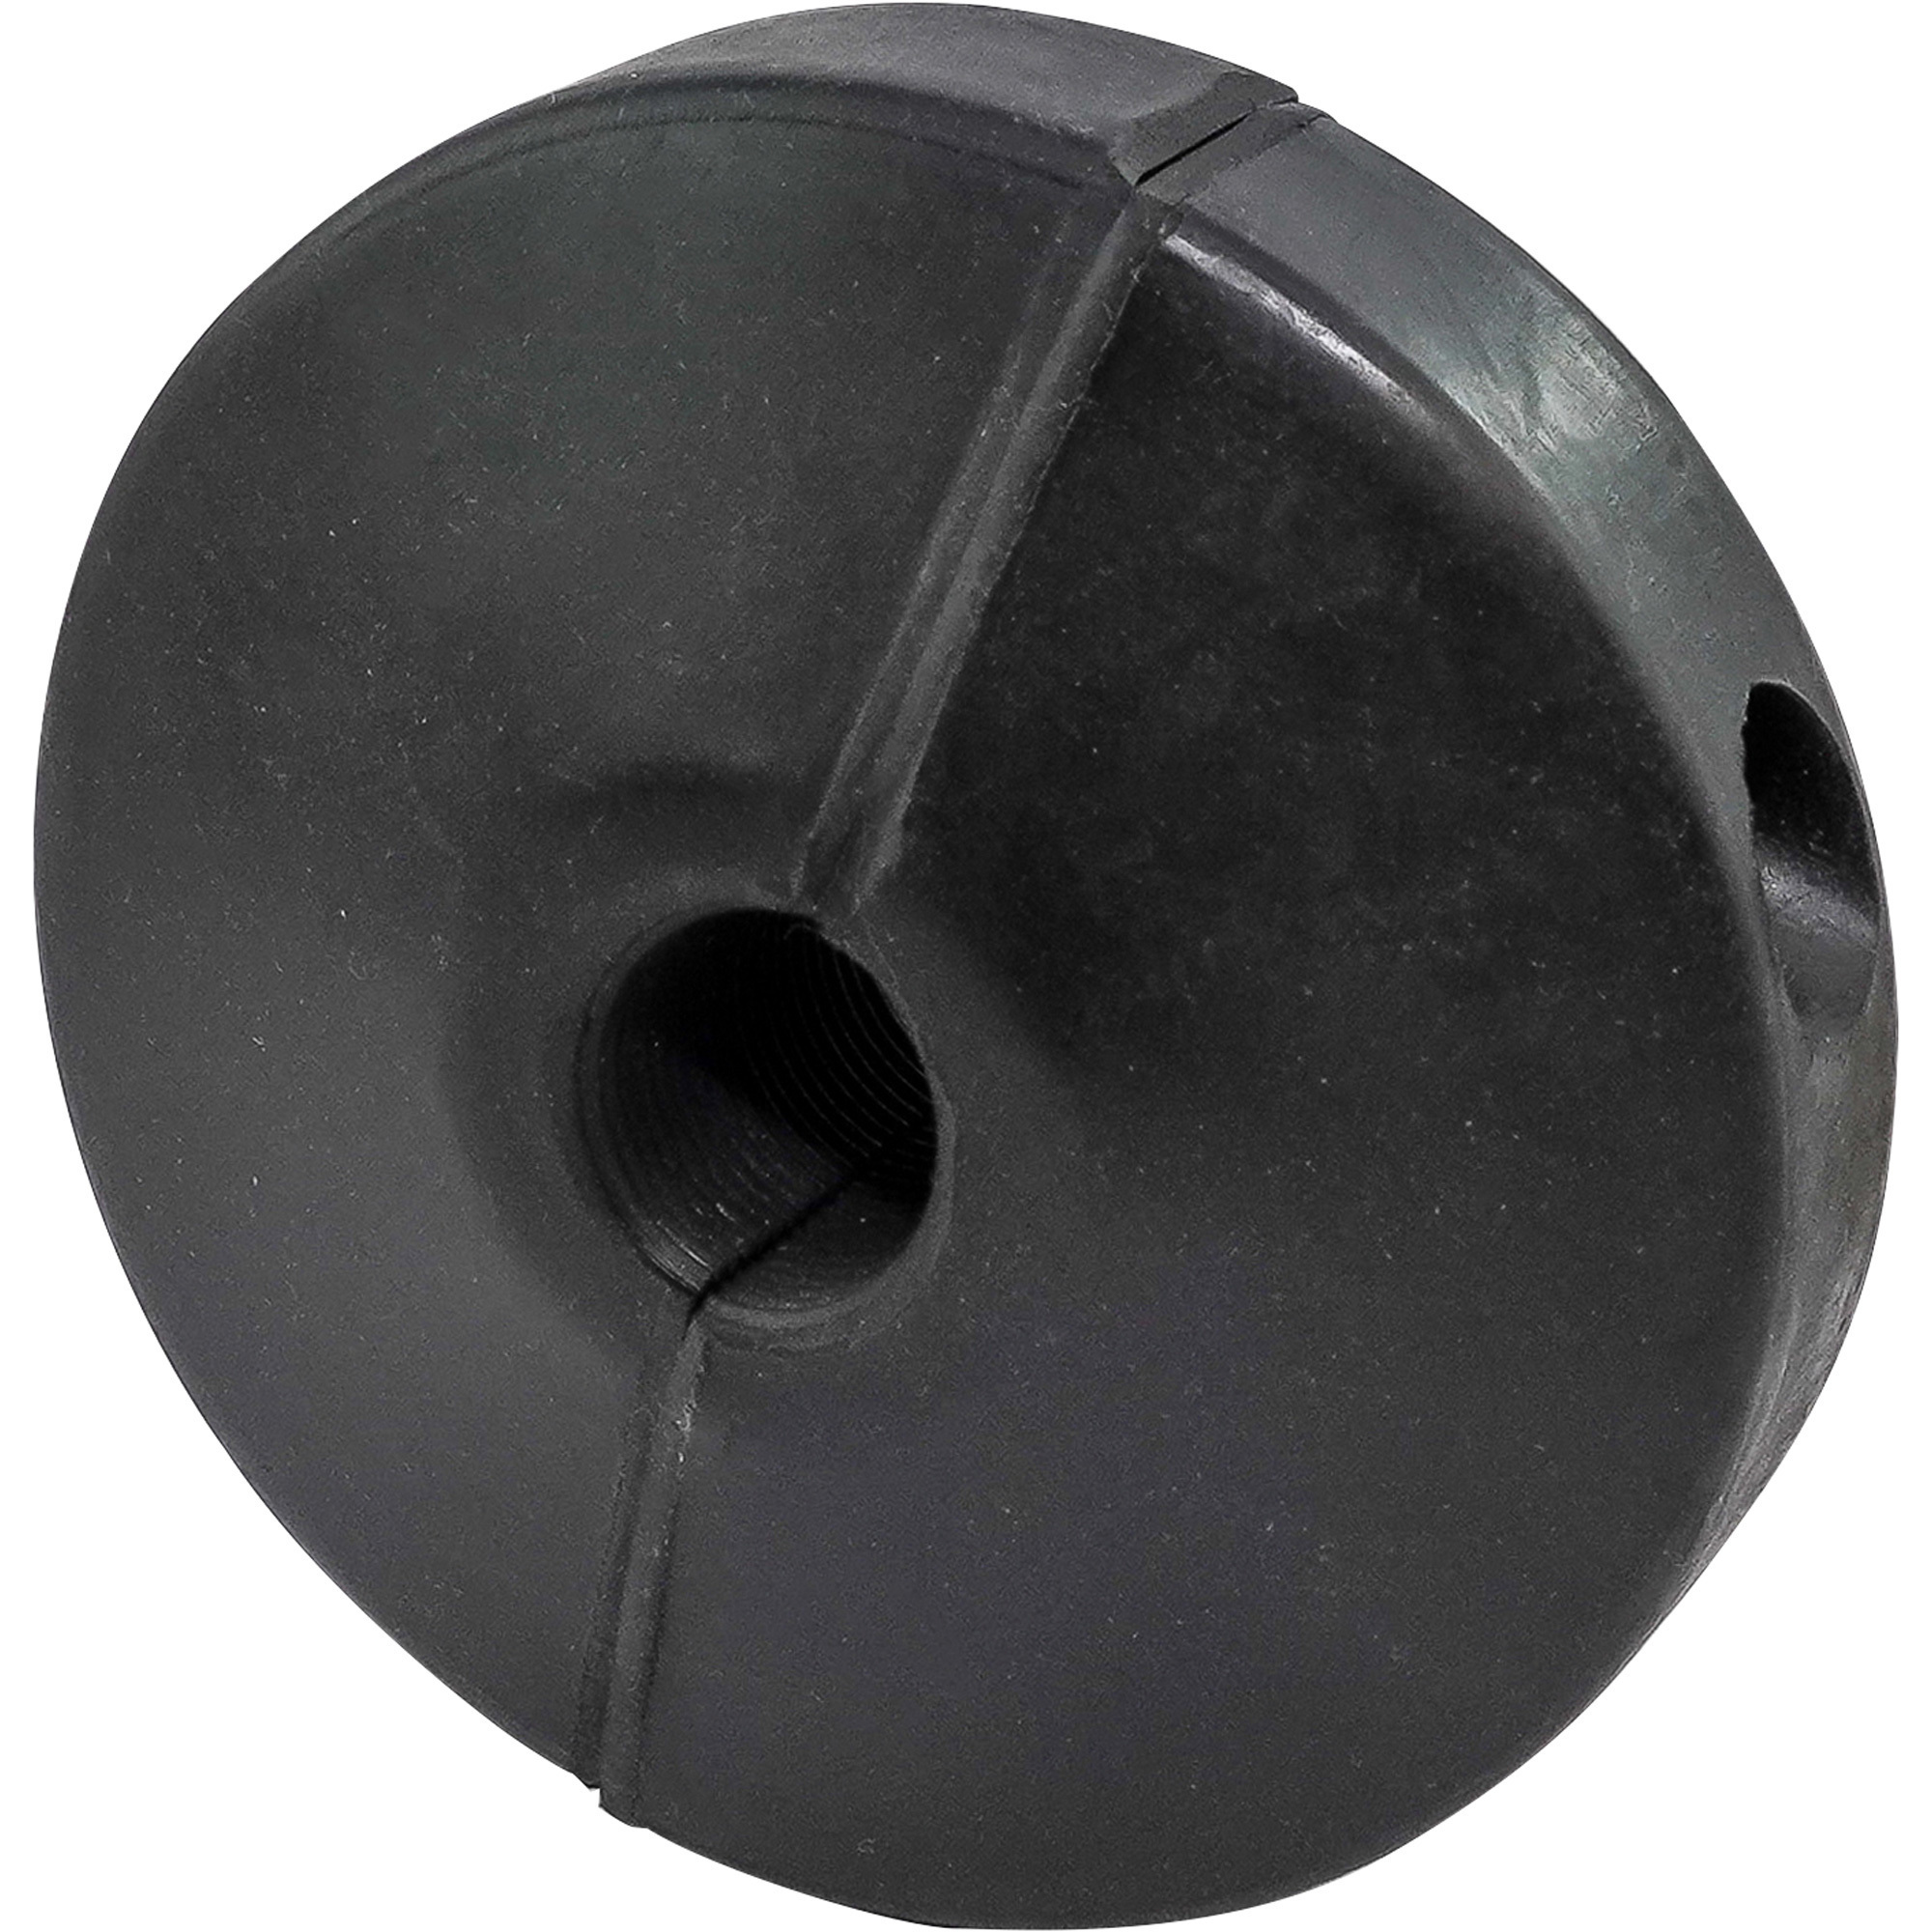 Coxreels 254 Ball Stop for Spring Driven Reel, Fits 1/2ID Hose.